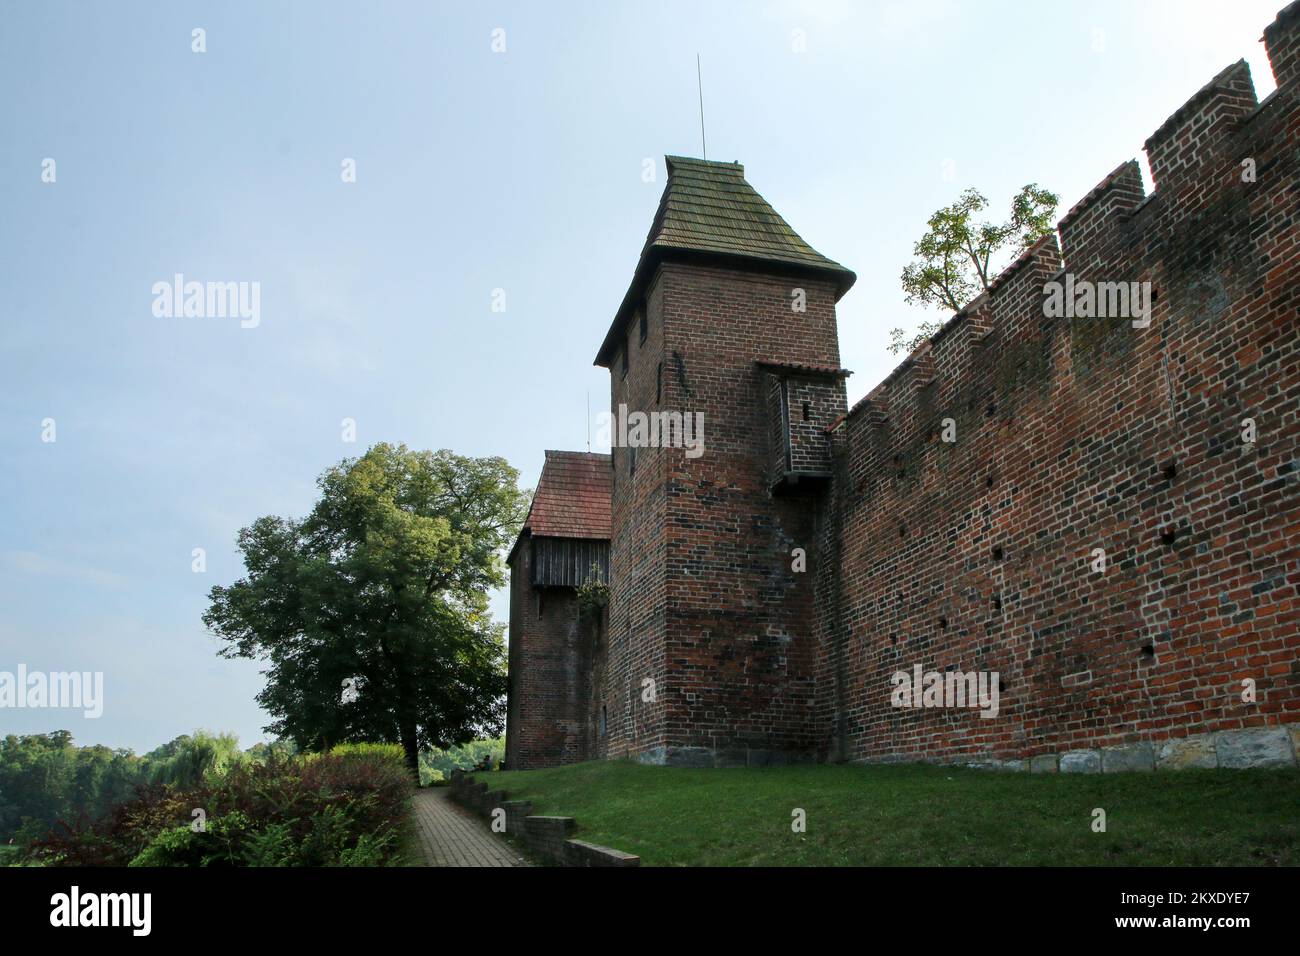 The old, brick city walls of the city of Nymburk in Czech Republic. The nice landmark and attraction for the tourists. Stock Photo